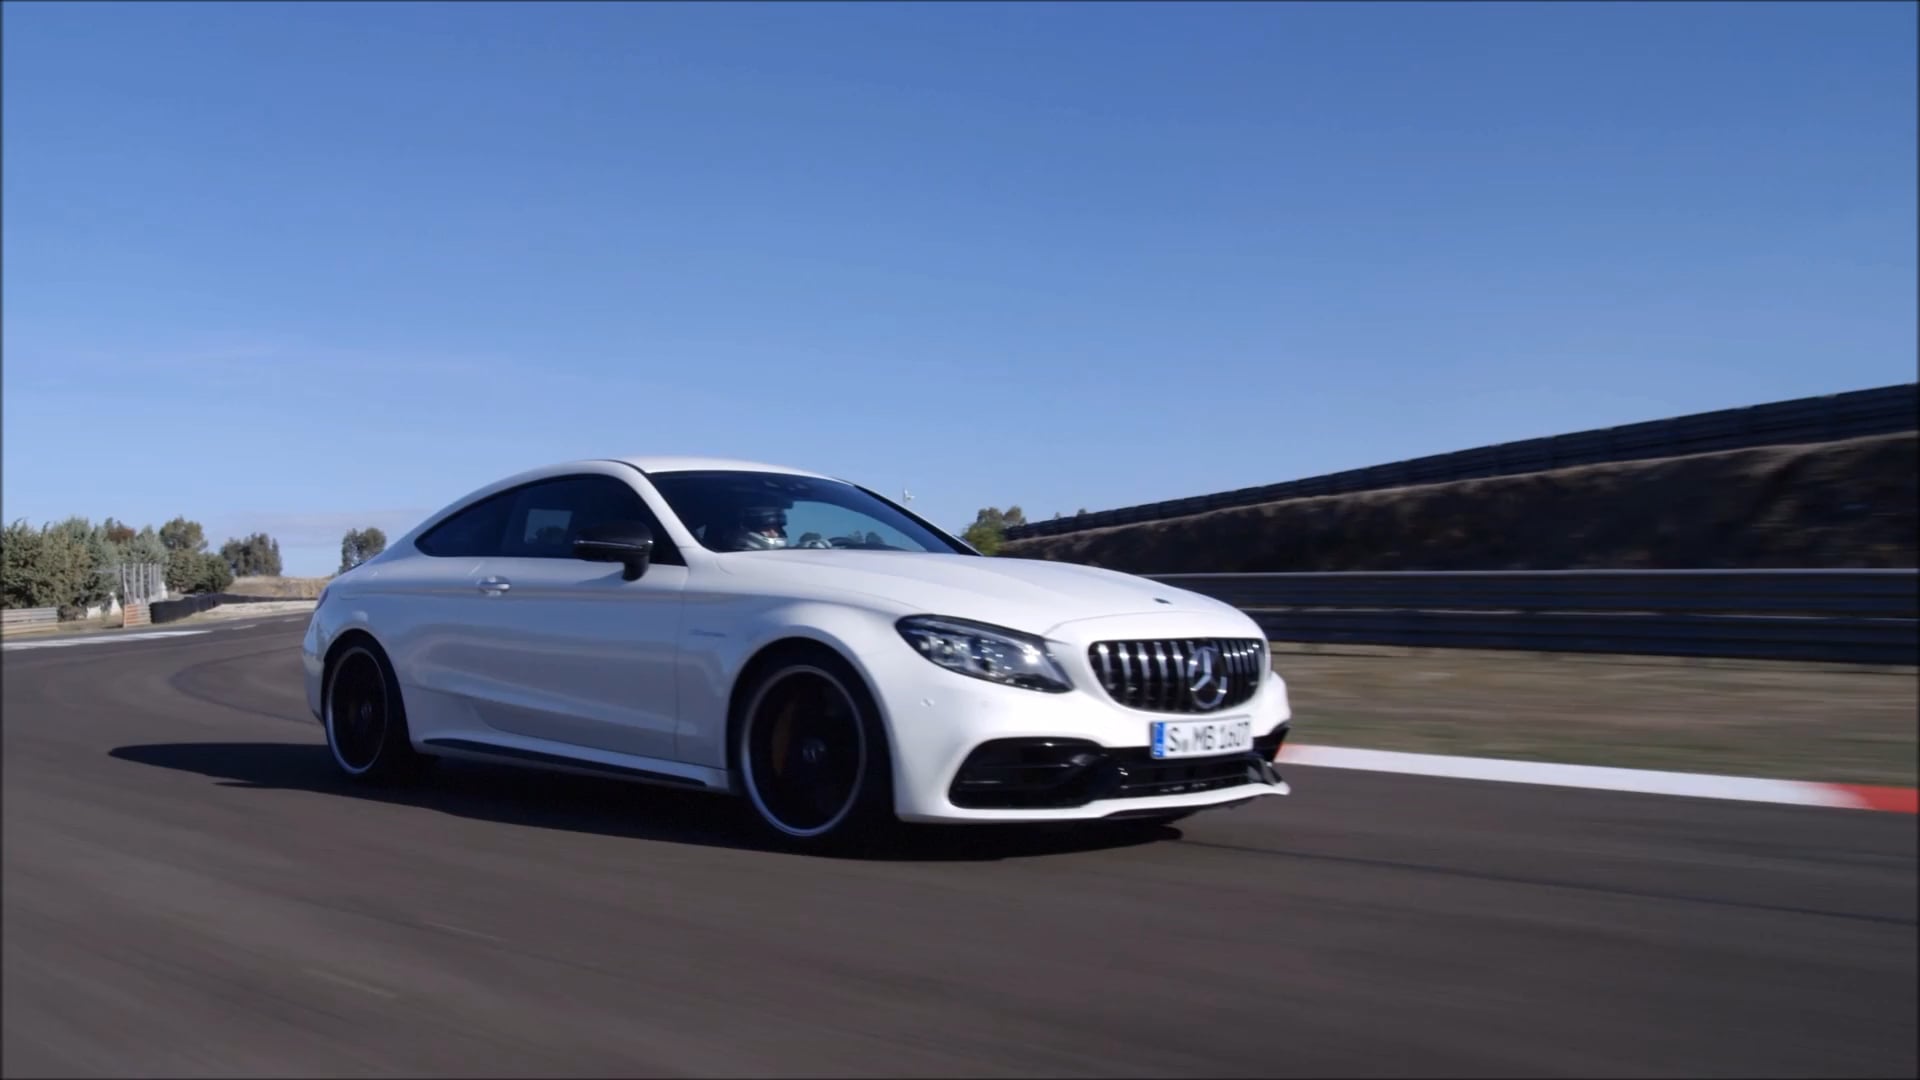 Overview: 2019 Mercedes-AMG C 63 S Coupe